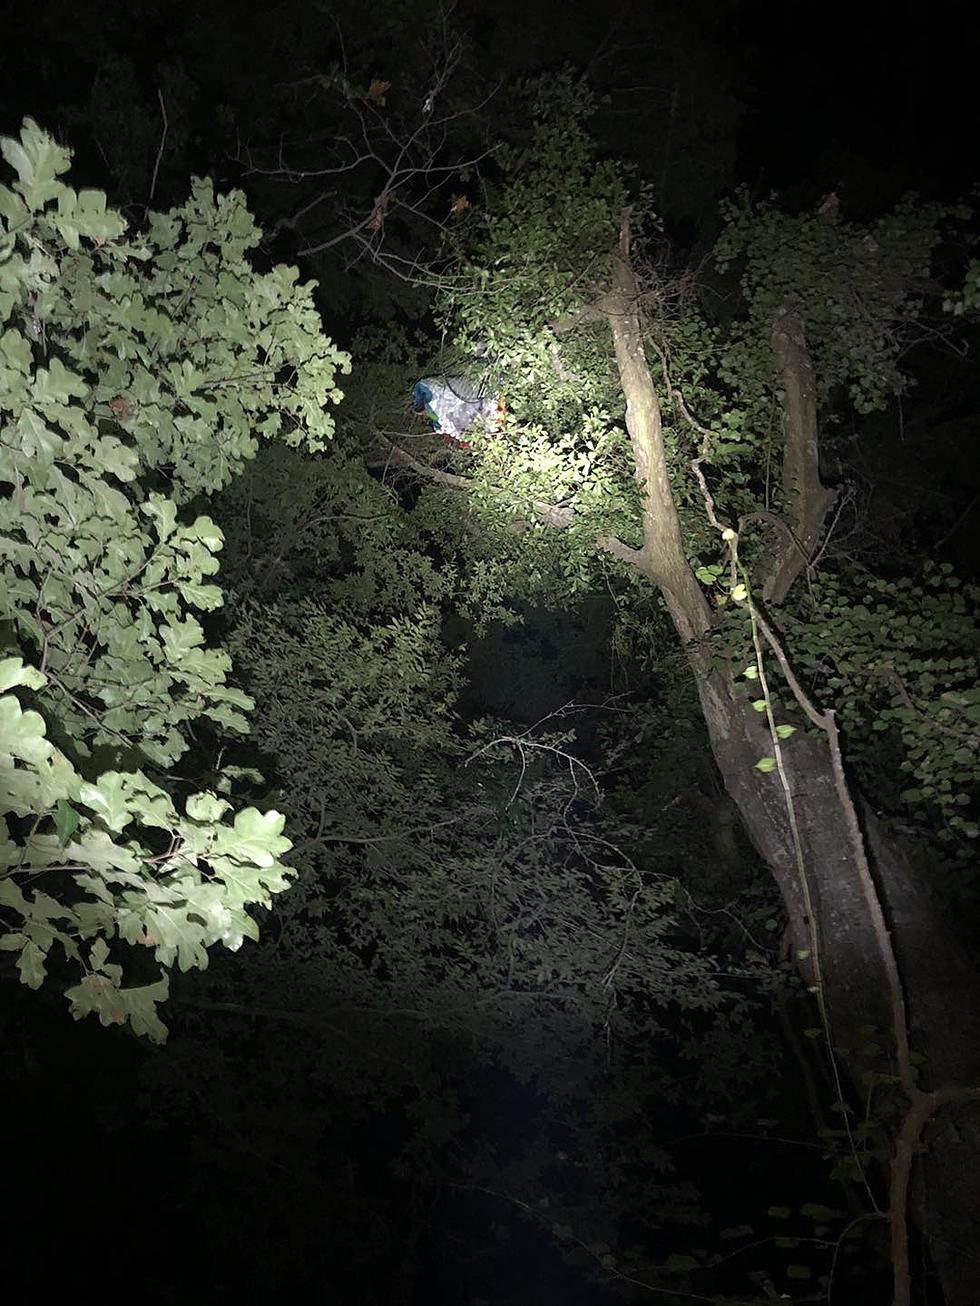 Louisiana Paraglider Crashes Into Tree, Rescued by Fire Dept